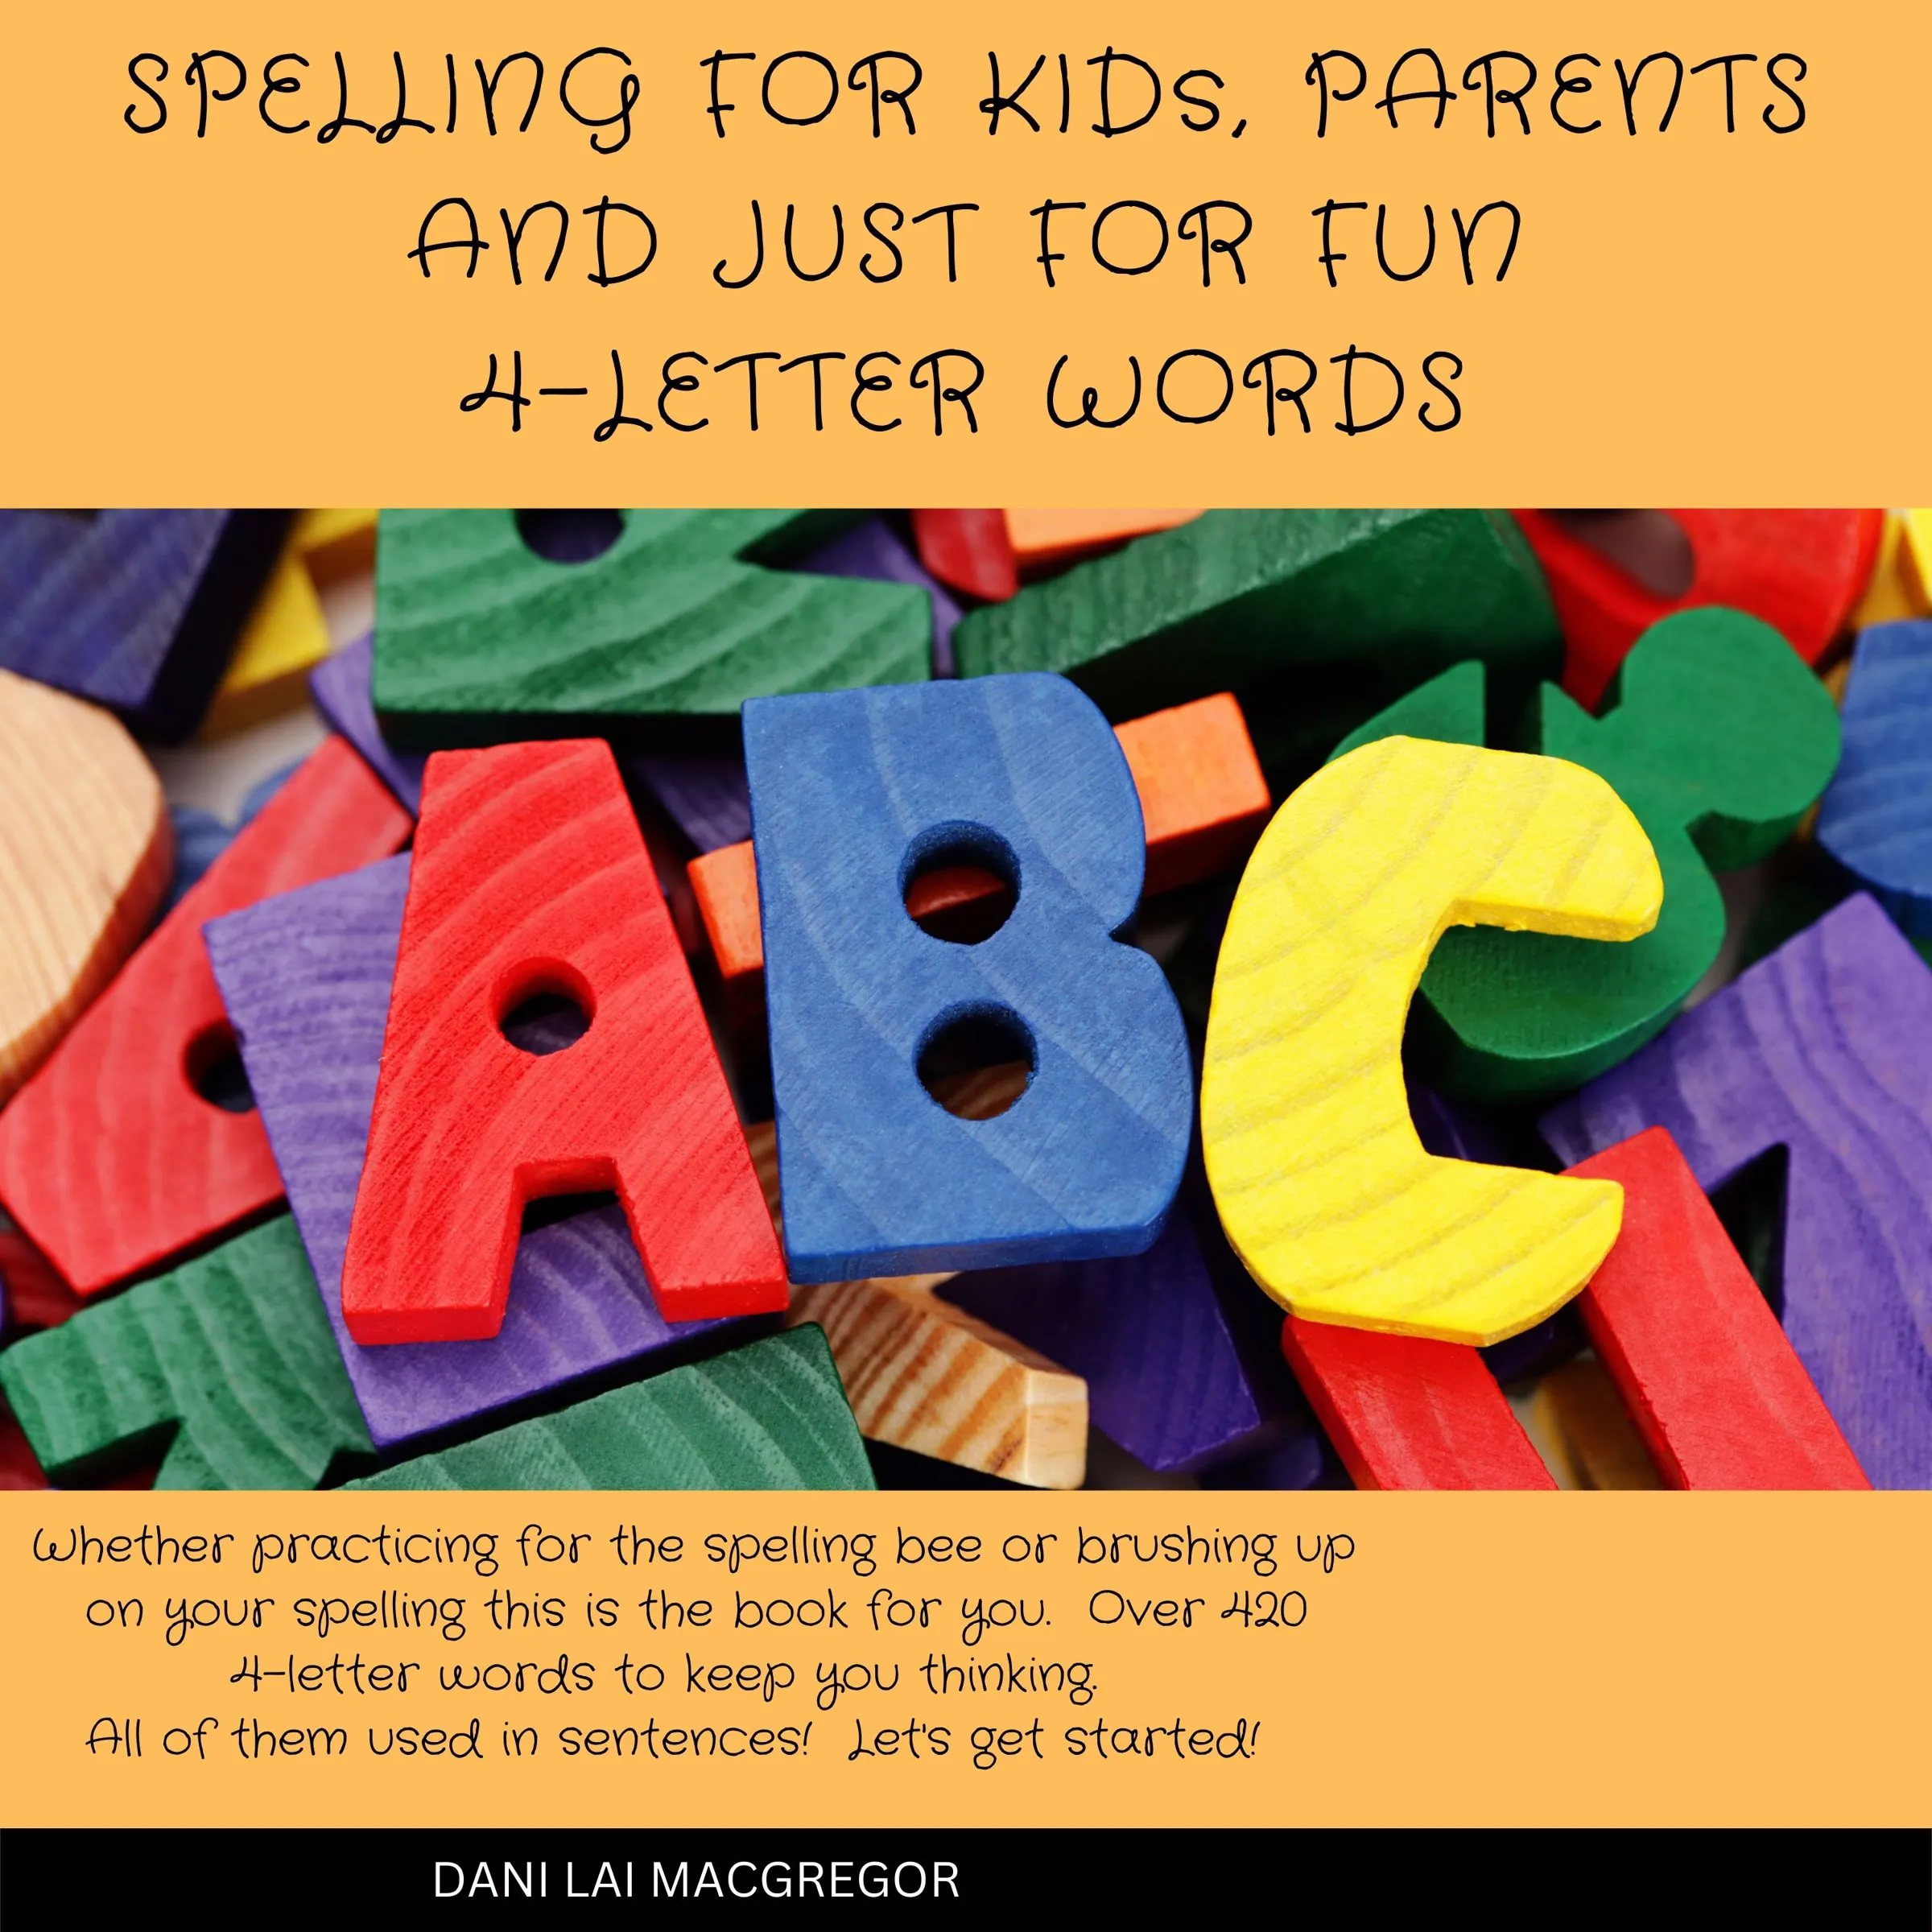 Spelling for Kids, Parents and Just for Fun - 4 Letter Words Audiobook by Dani Lai MacGregor